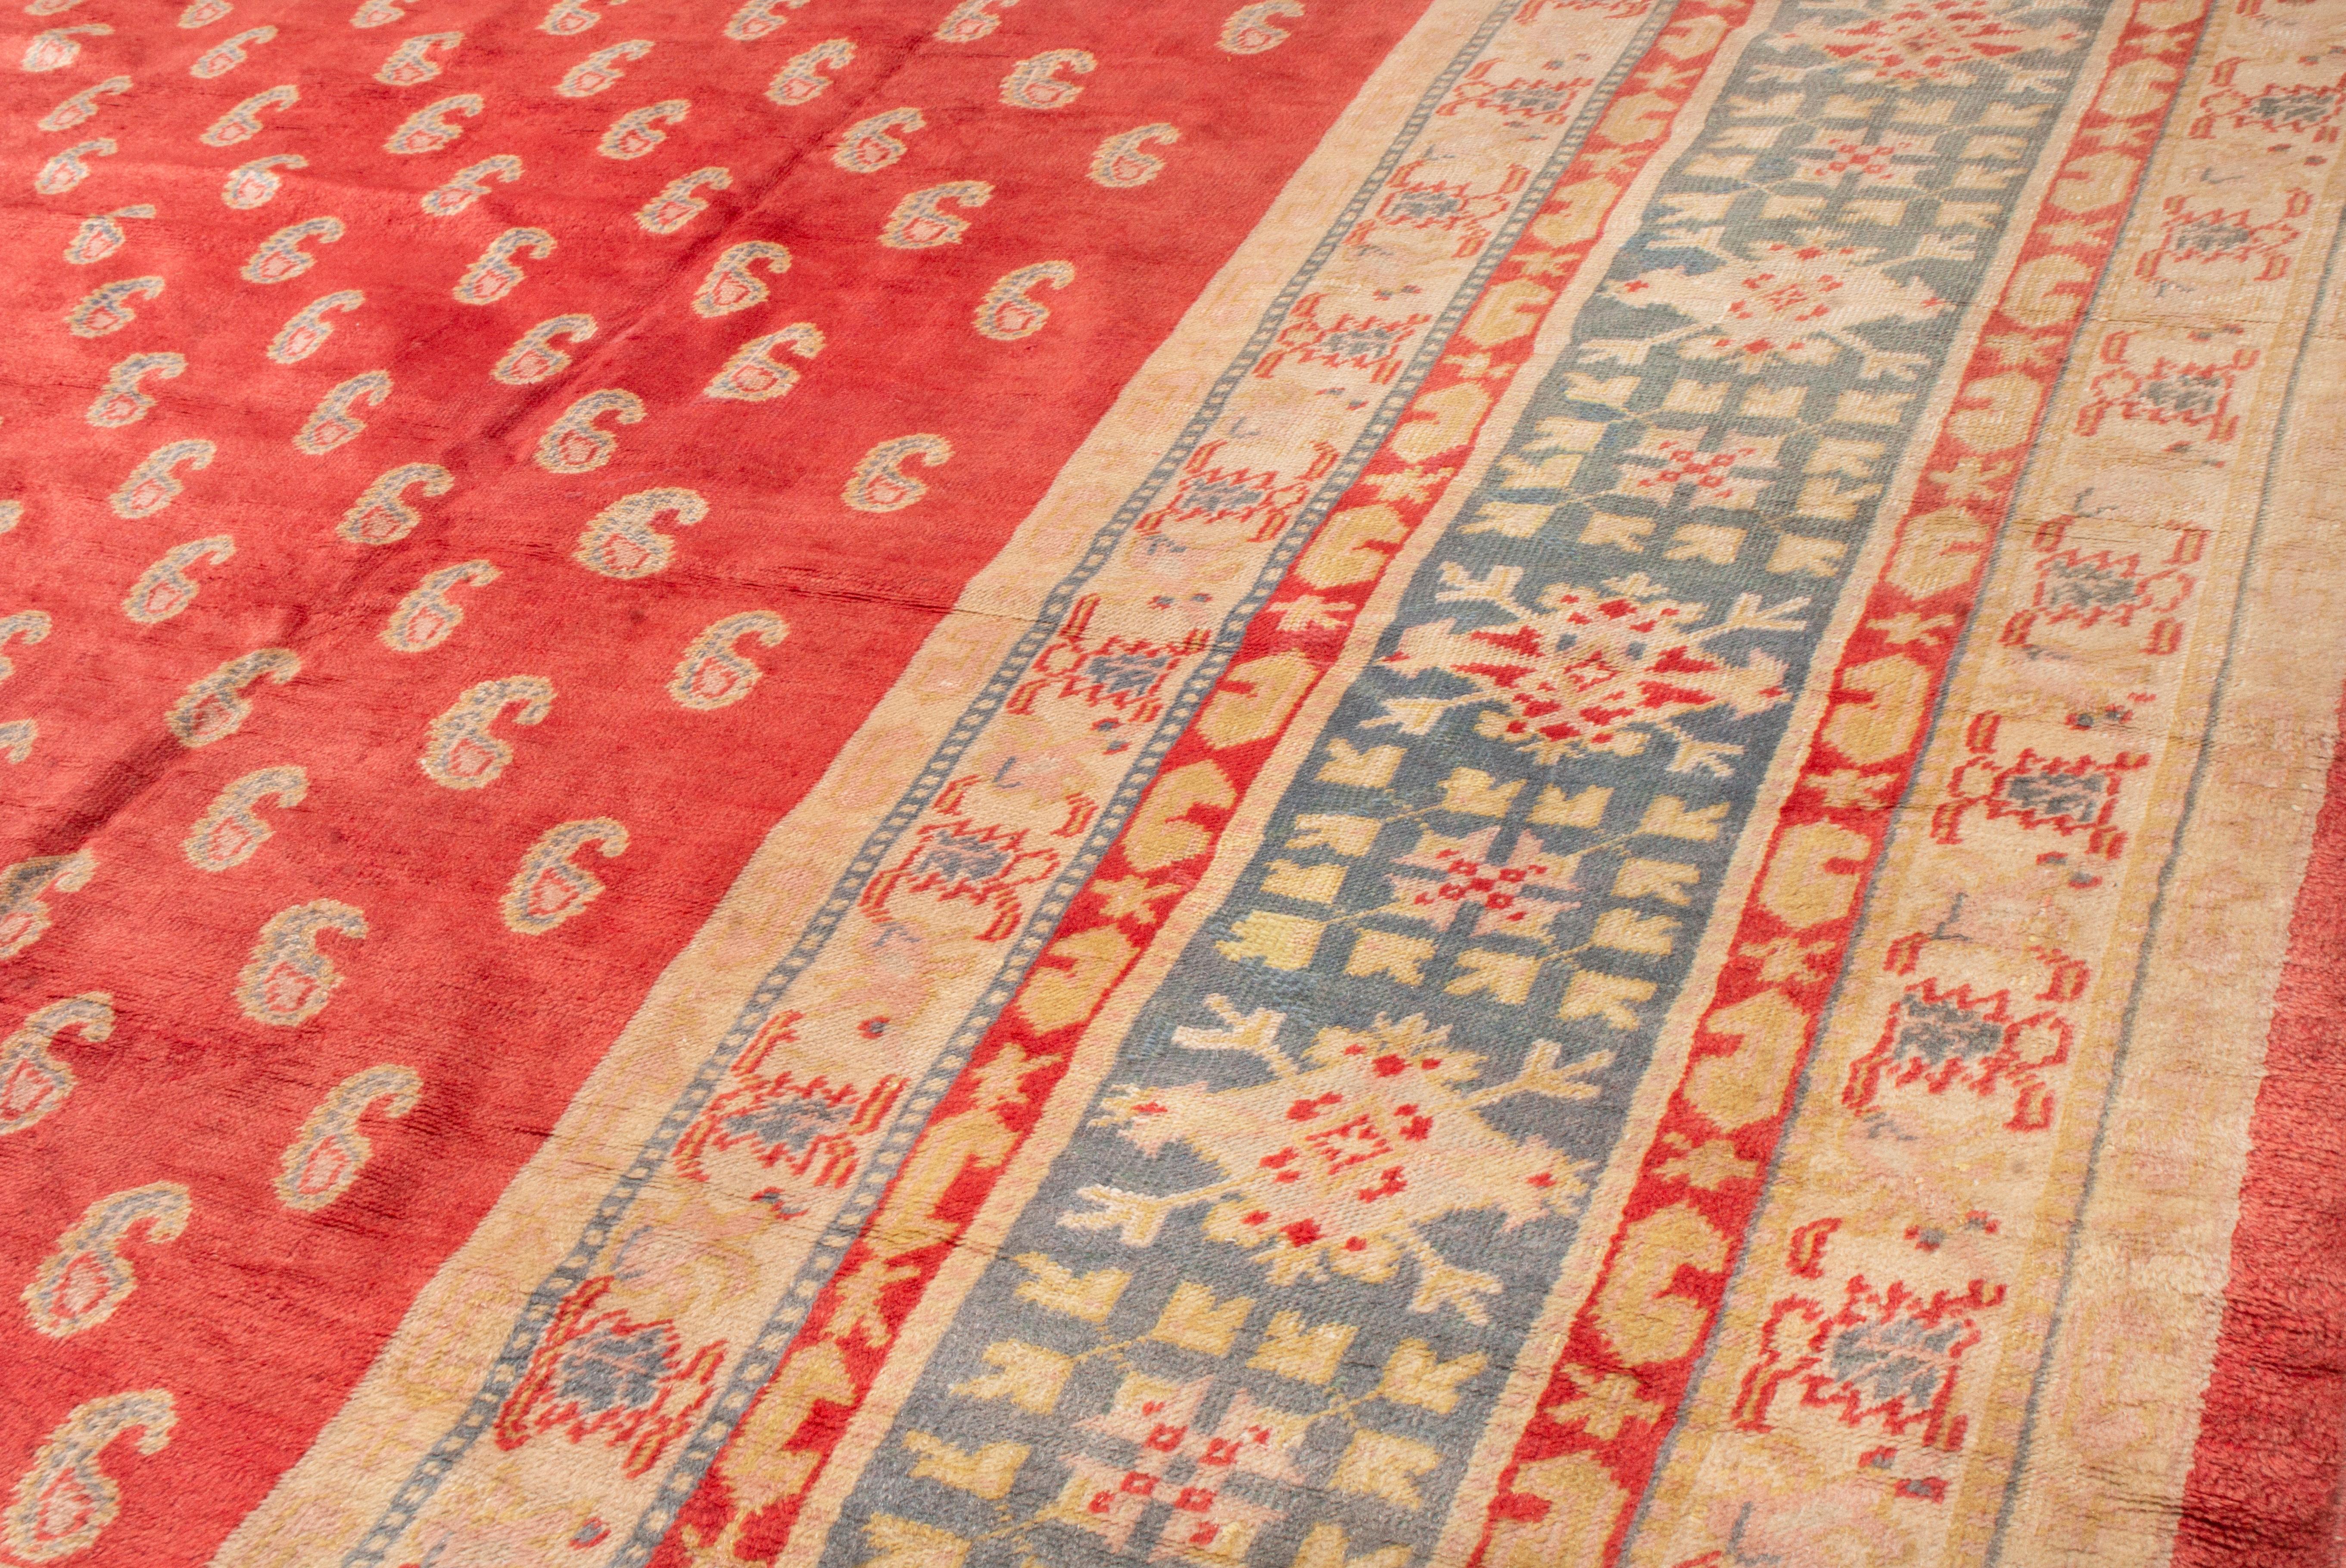 Hand-Knotted Antique Oushak Red and Beige Wool Rug with Paisleys